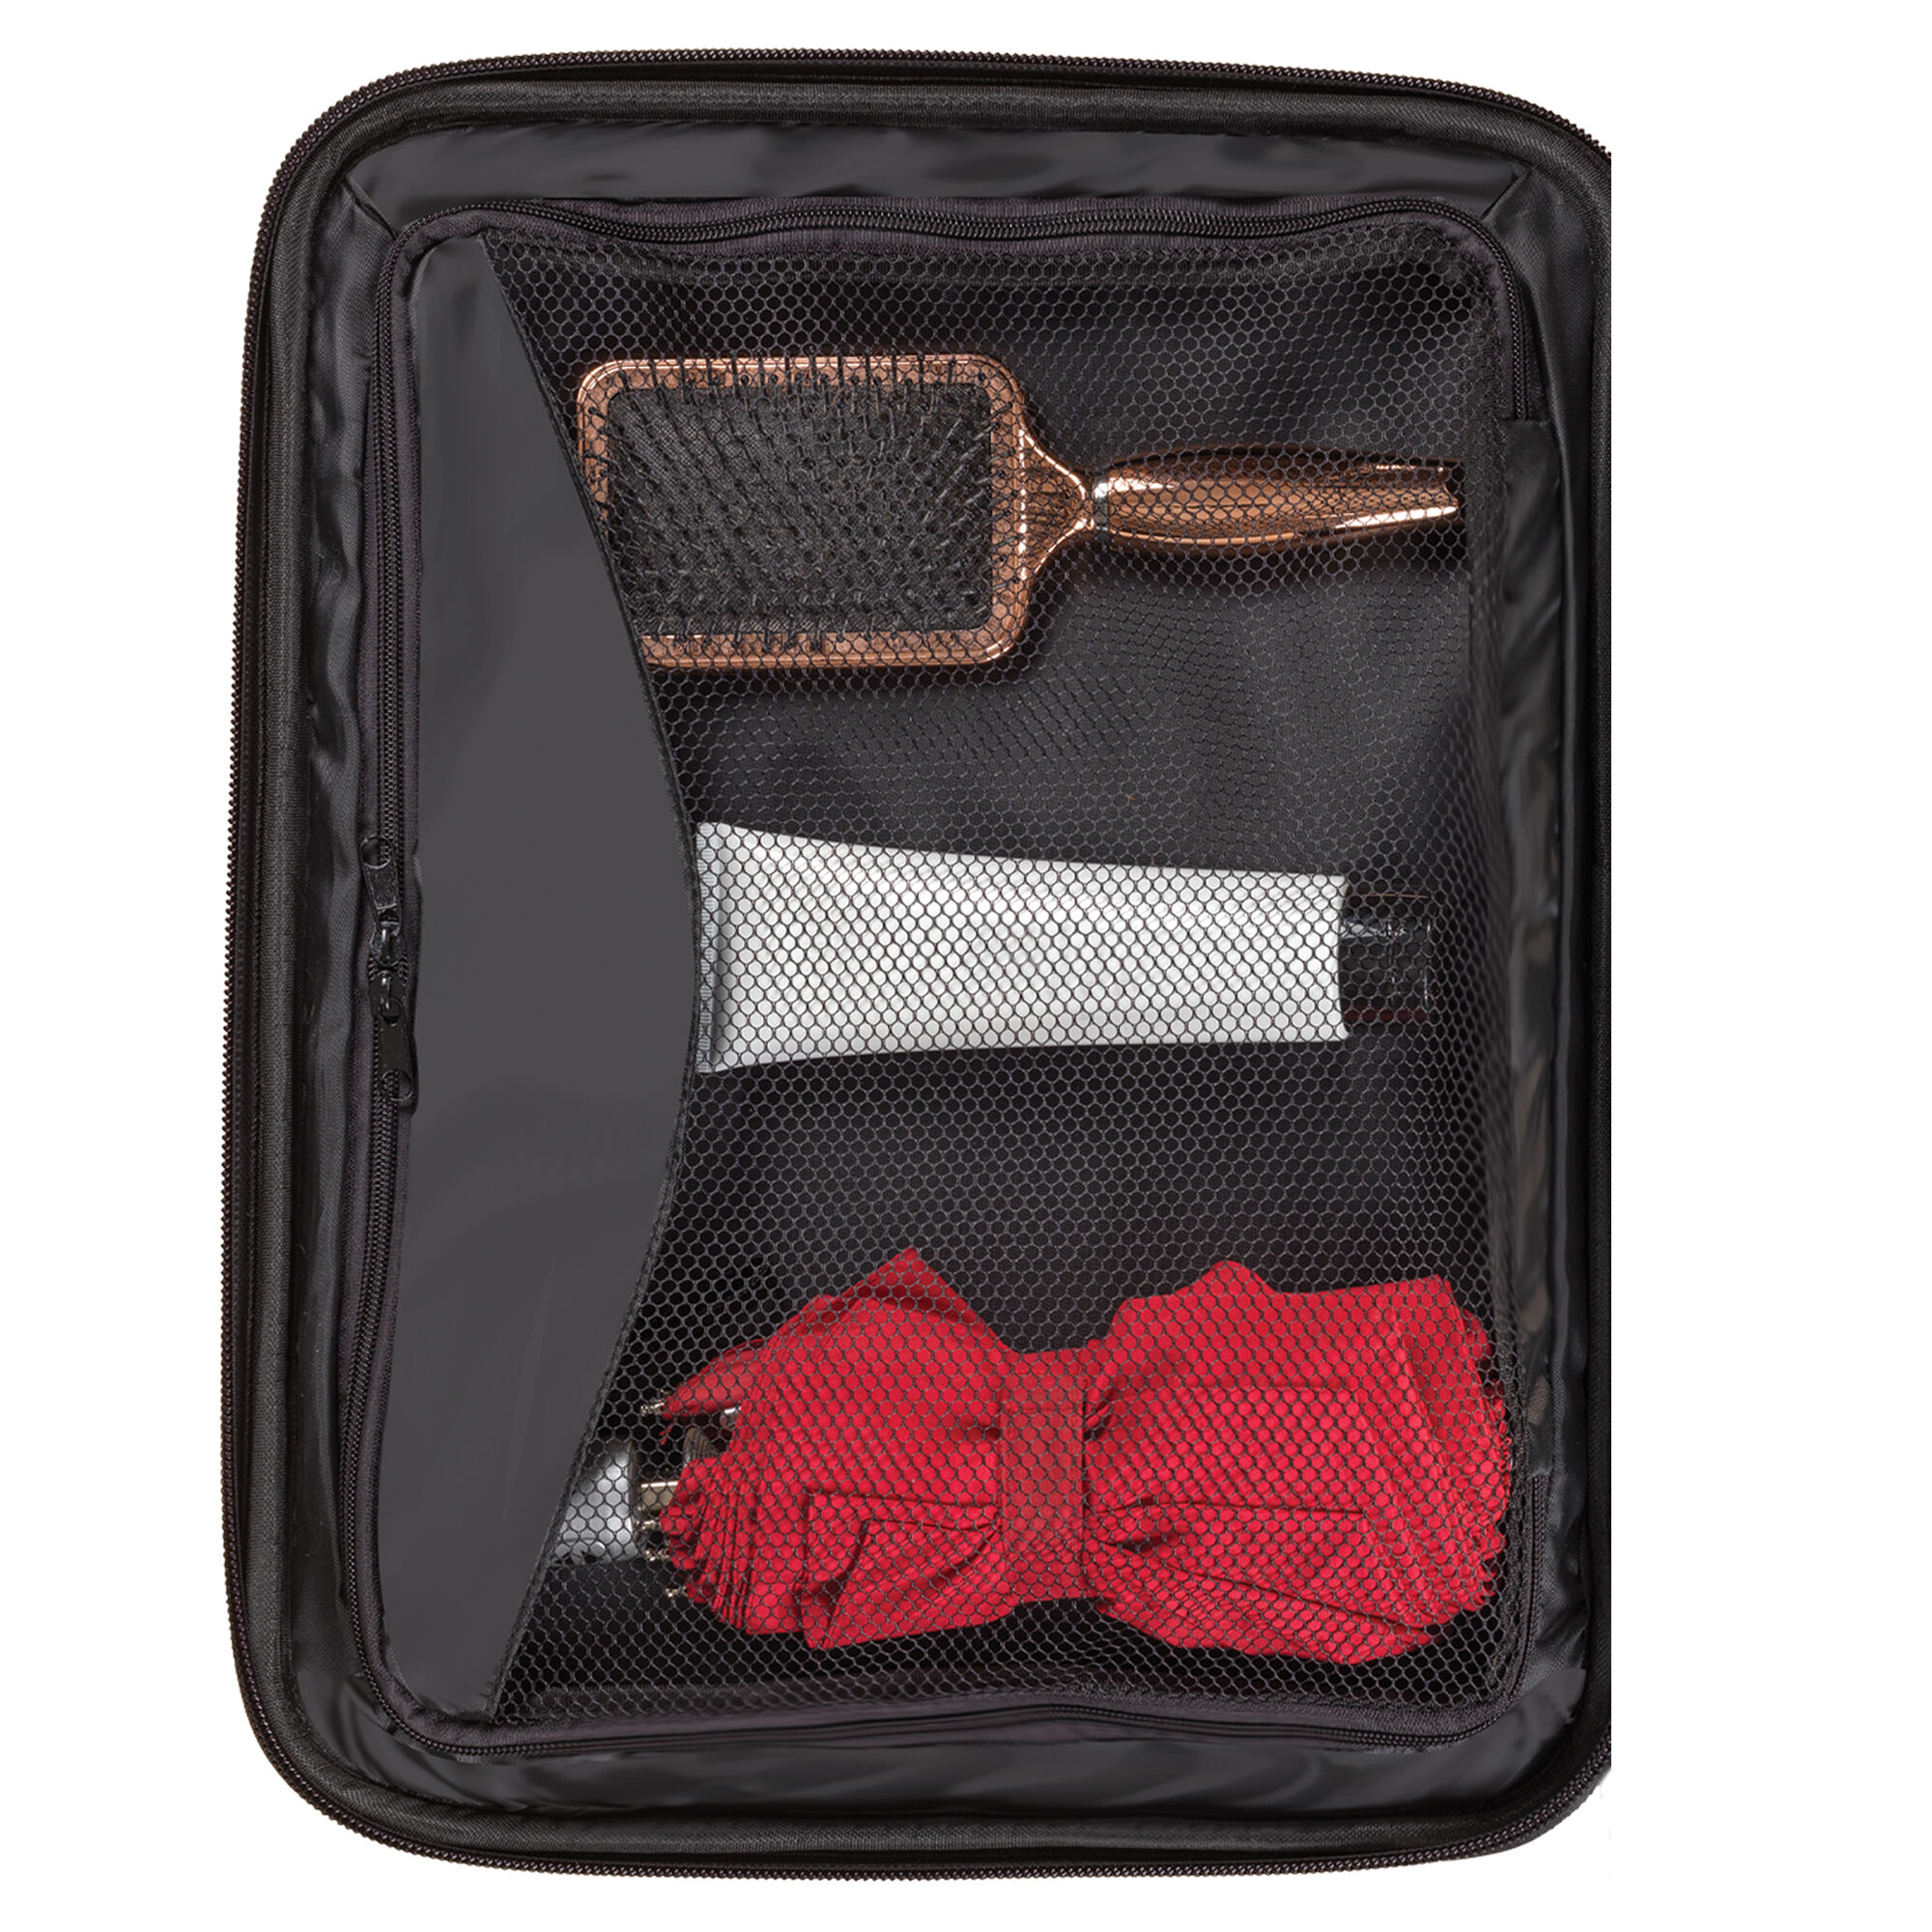 The Personalized Ultimate Carry on 10029 0014 f zip interior